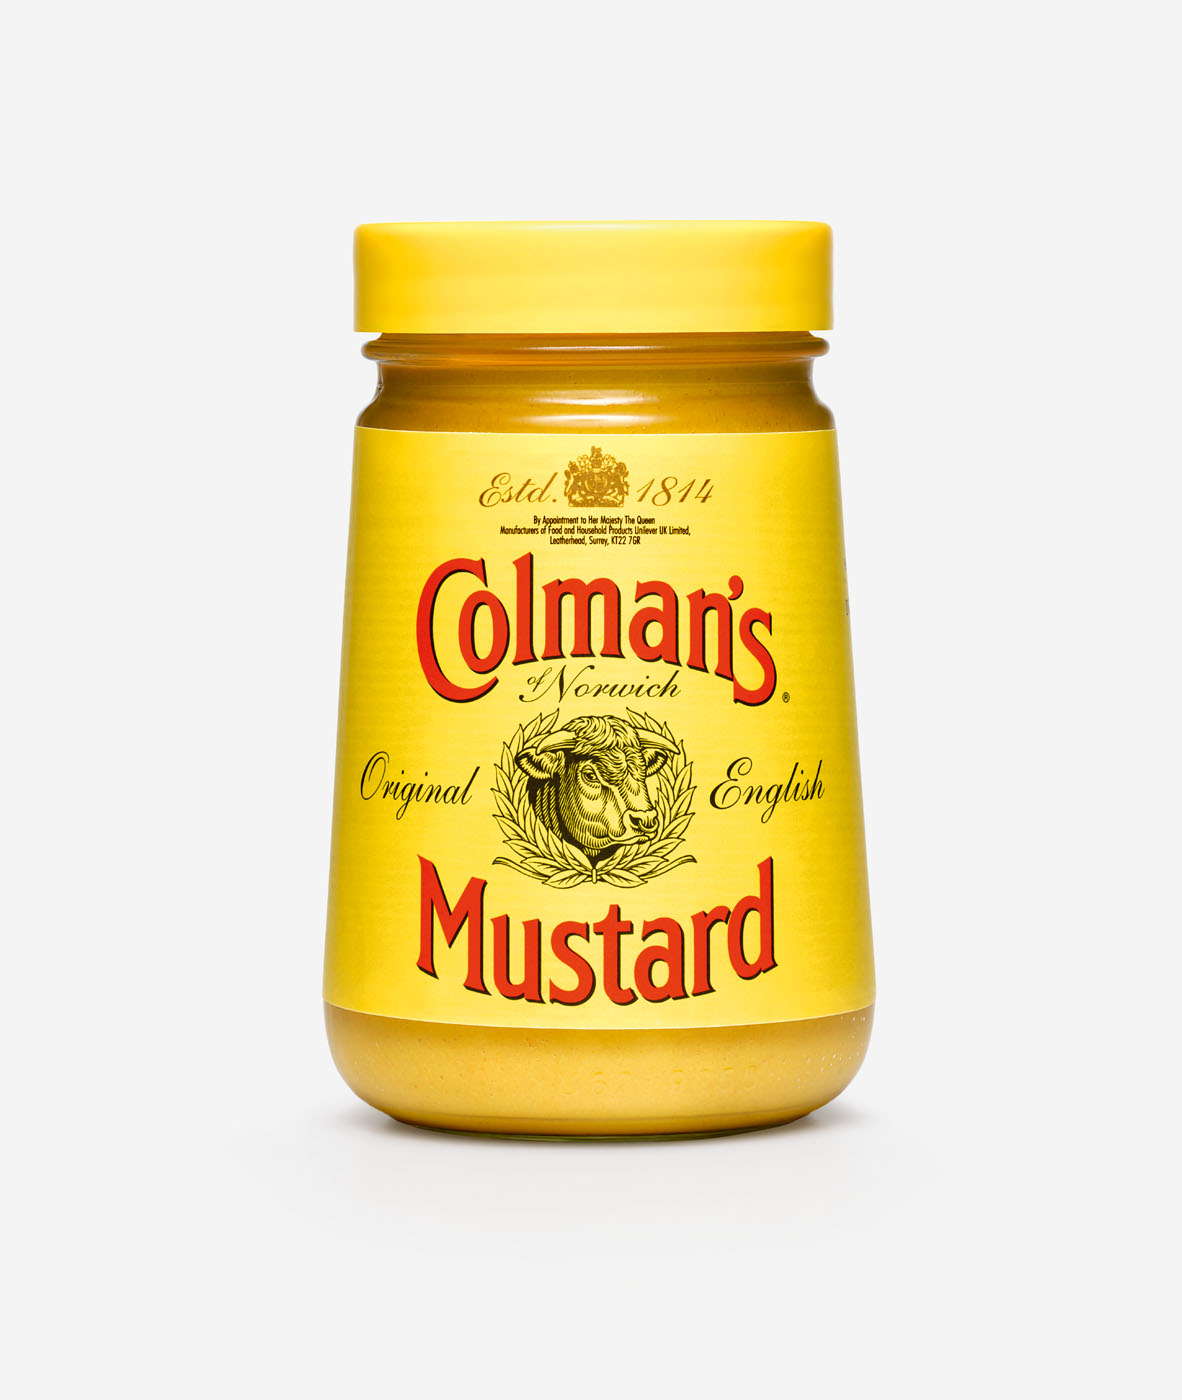 Mustard pot by Alexander Kent London based still life and product photographer.